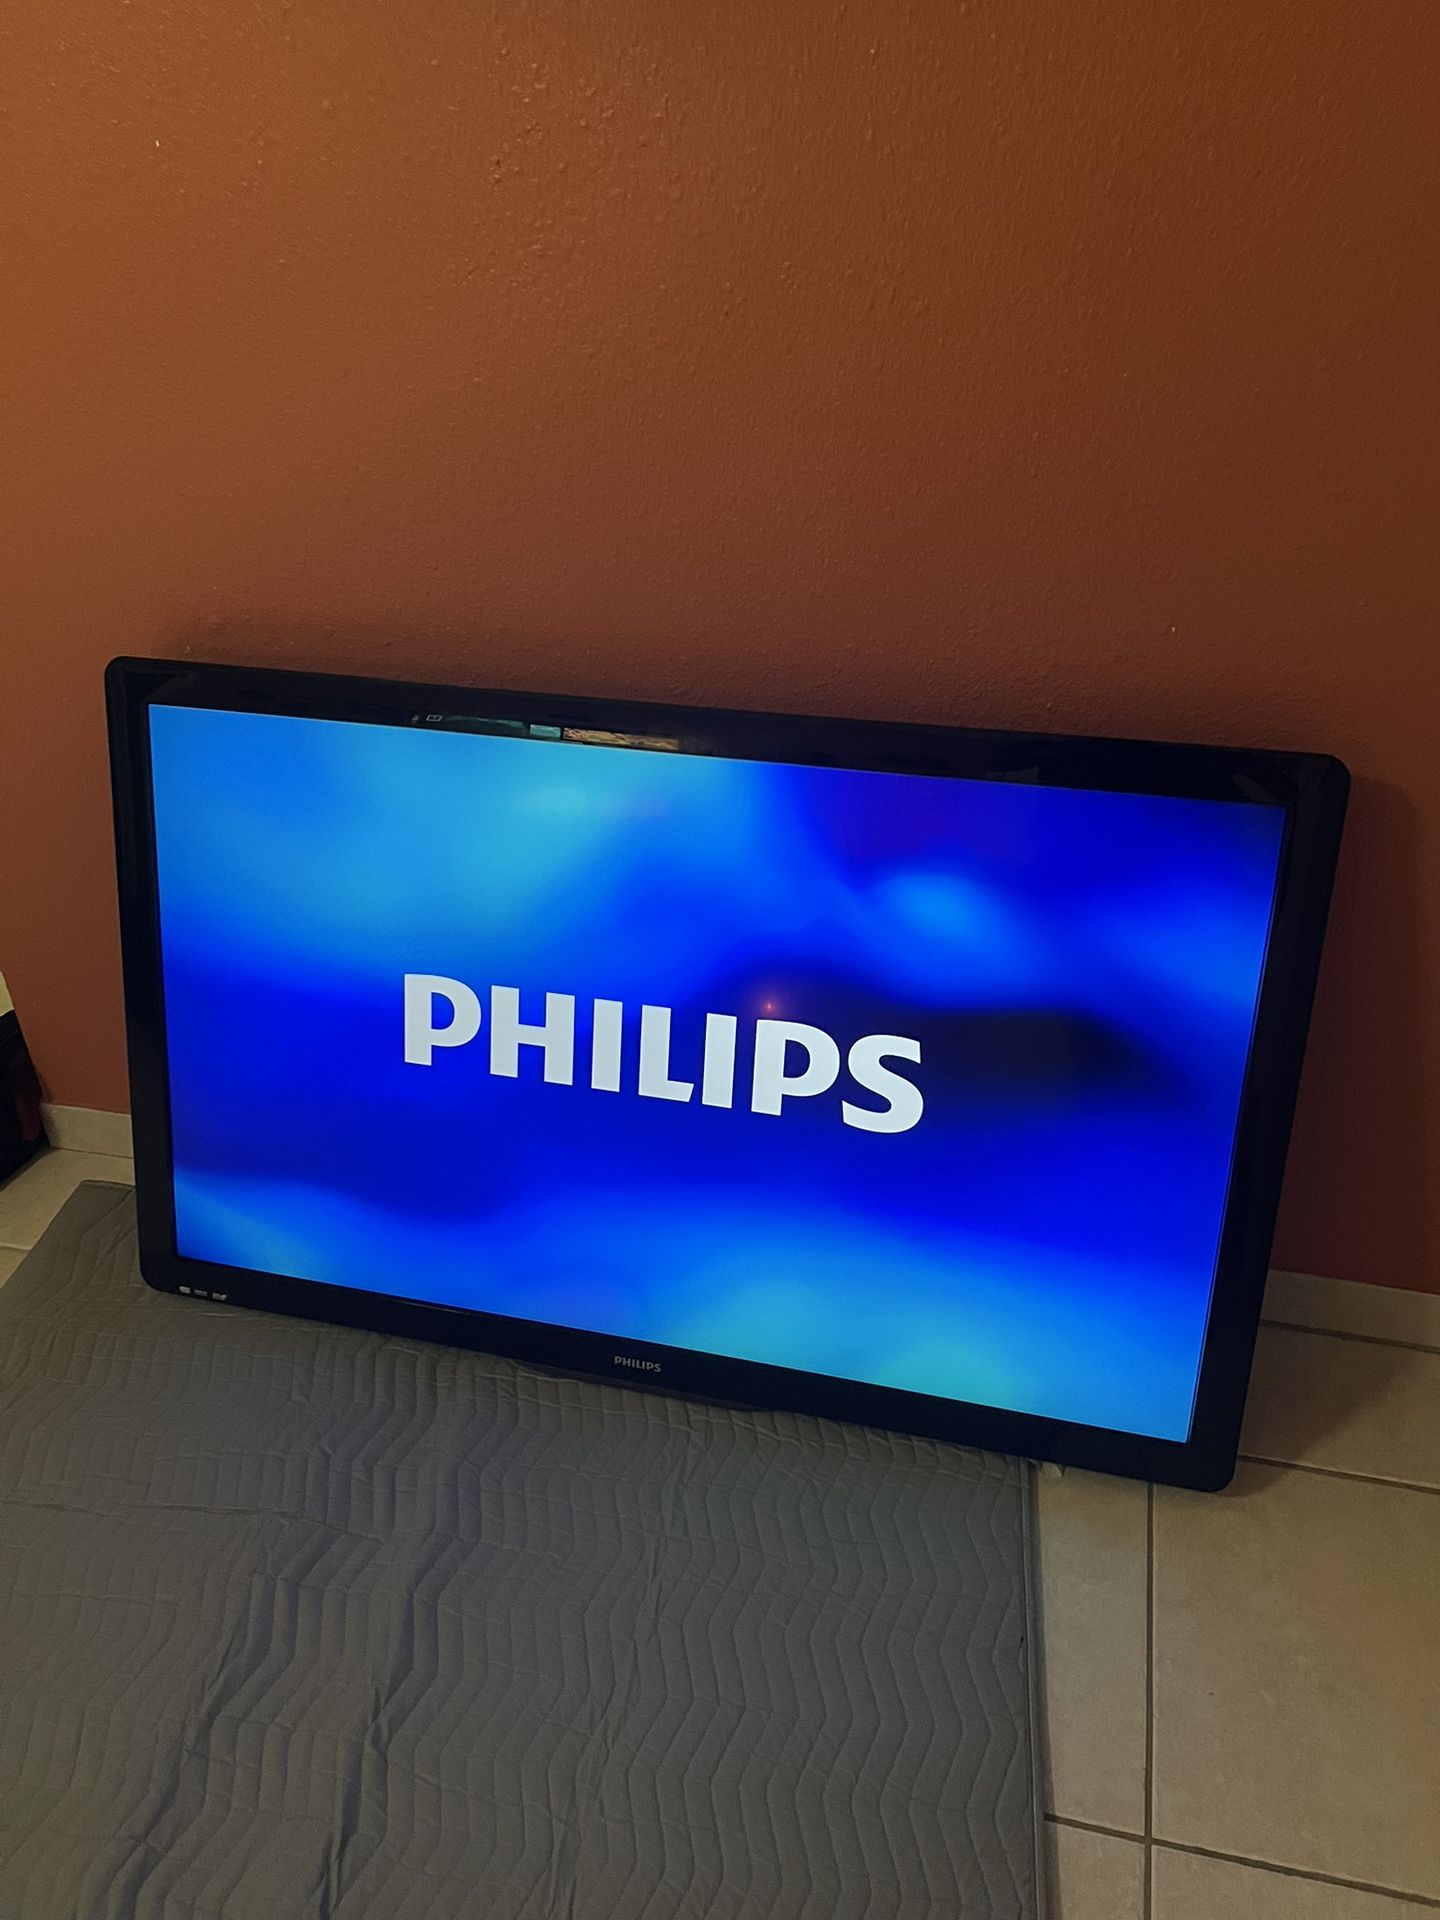 Phillips 55” Inches